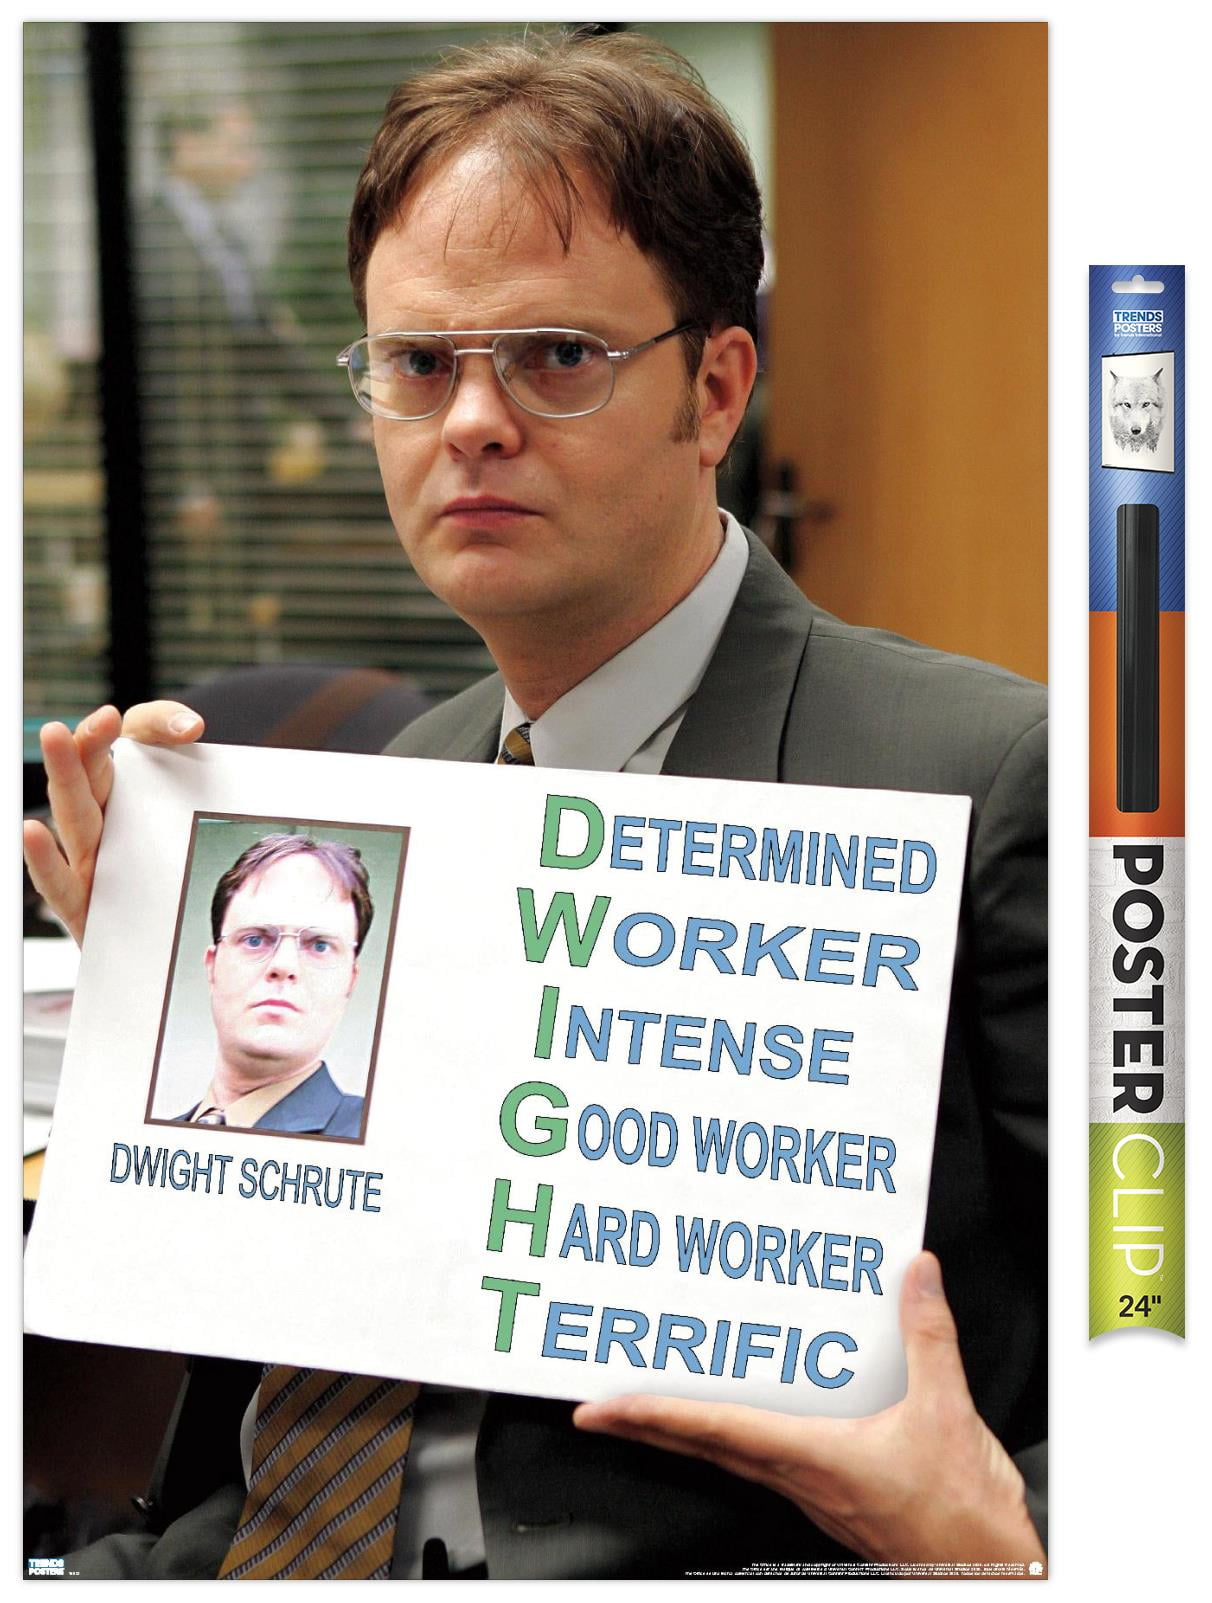 The Office Dwight Schrute Characteristics Wall Poster With